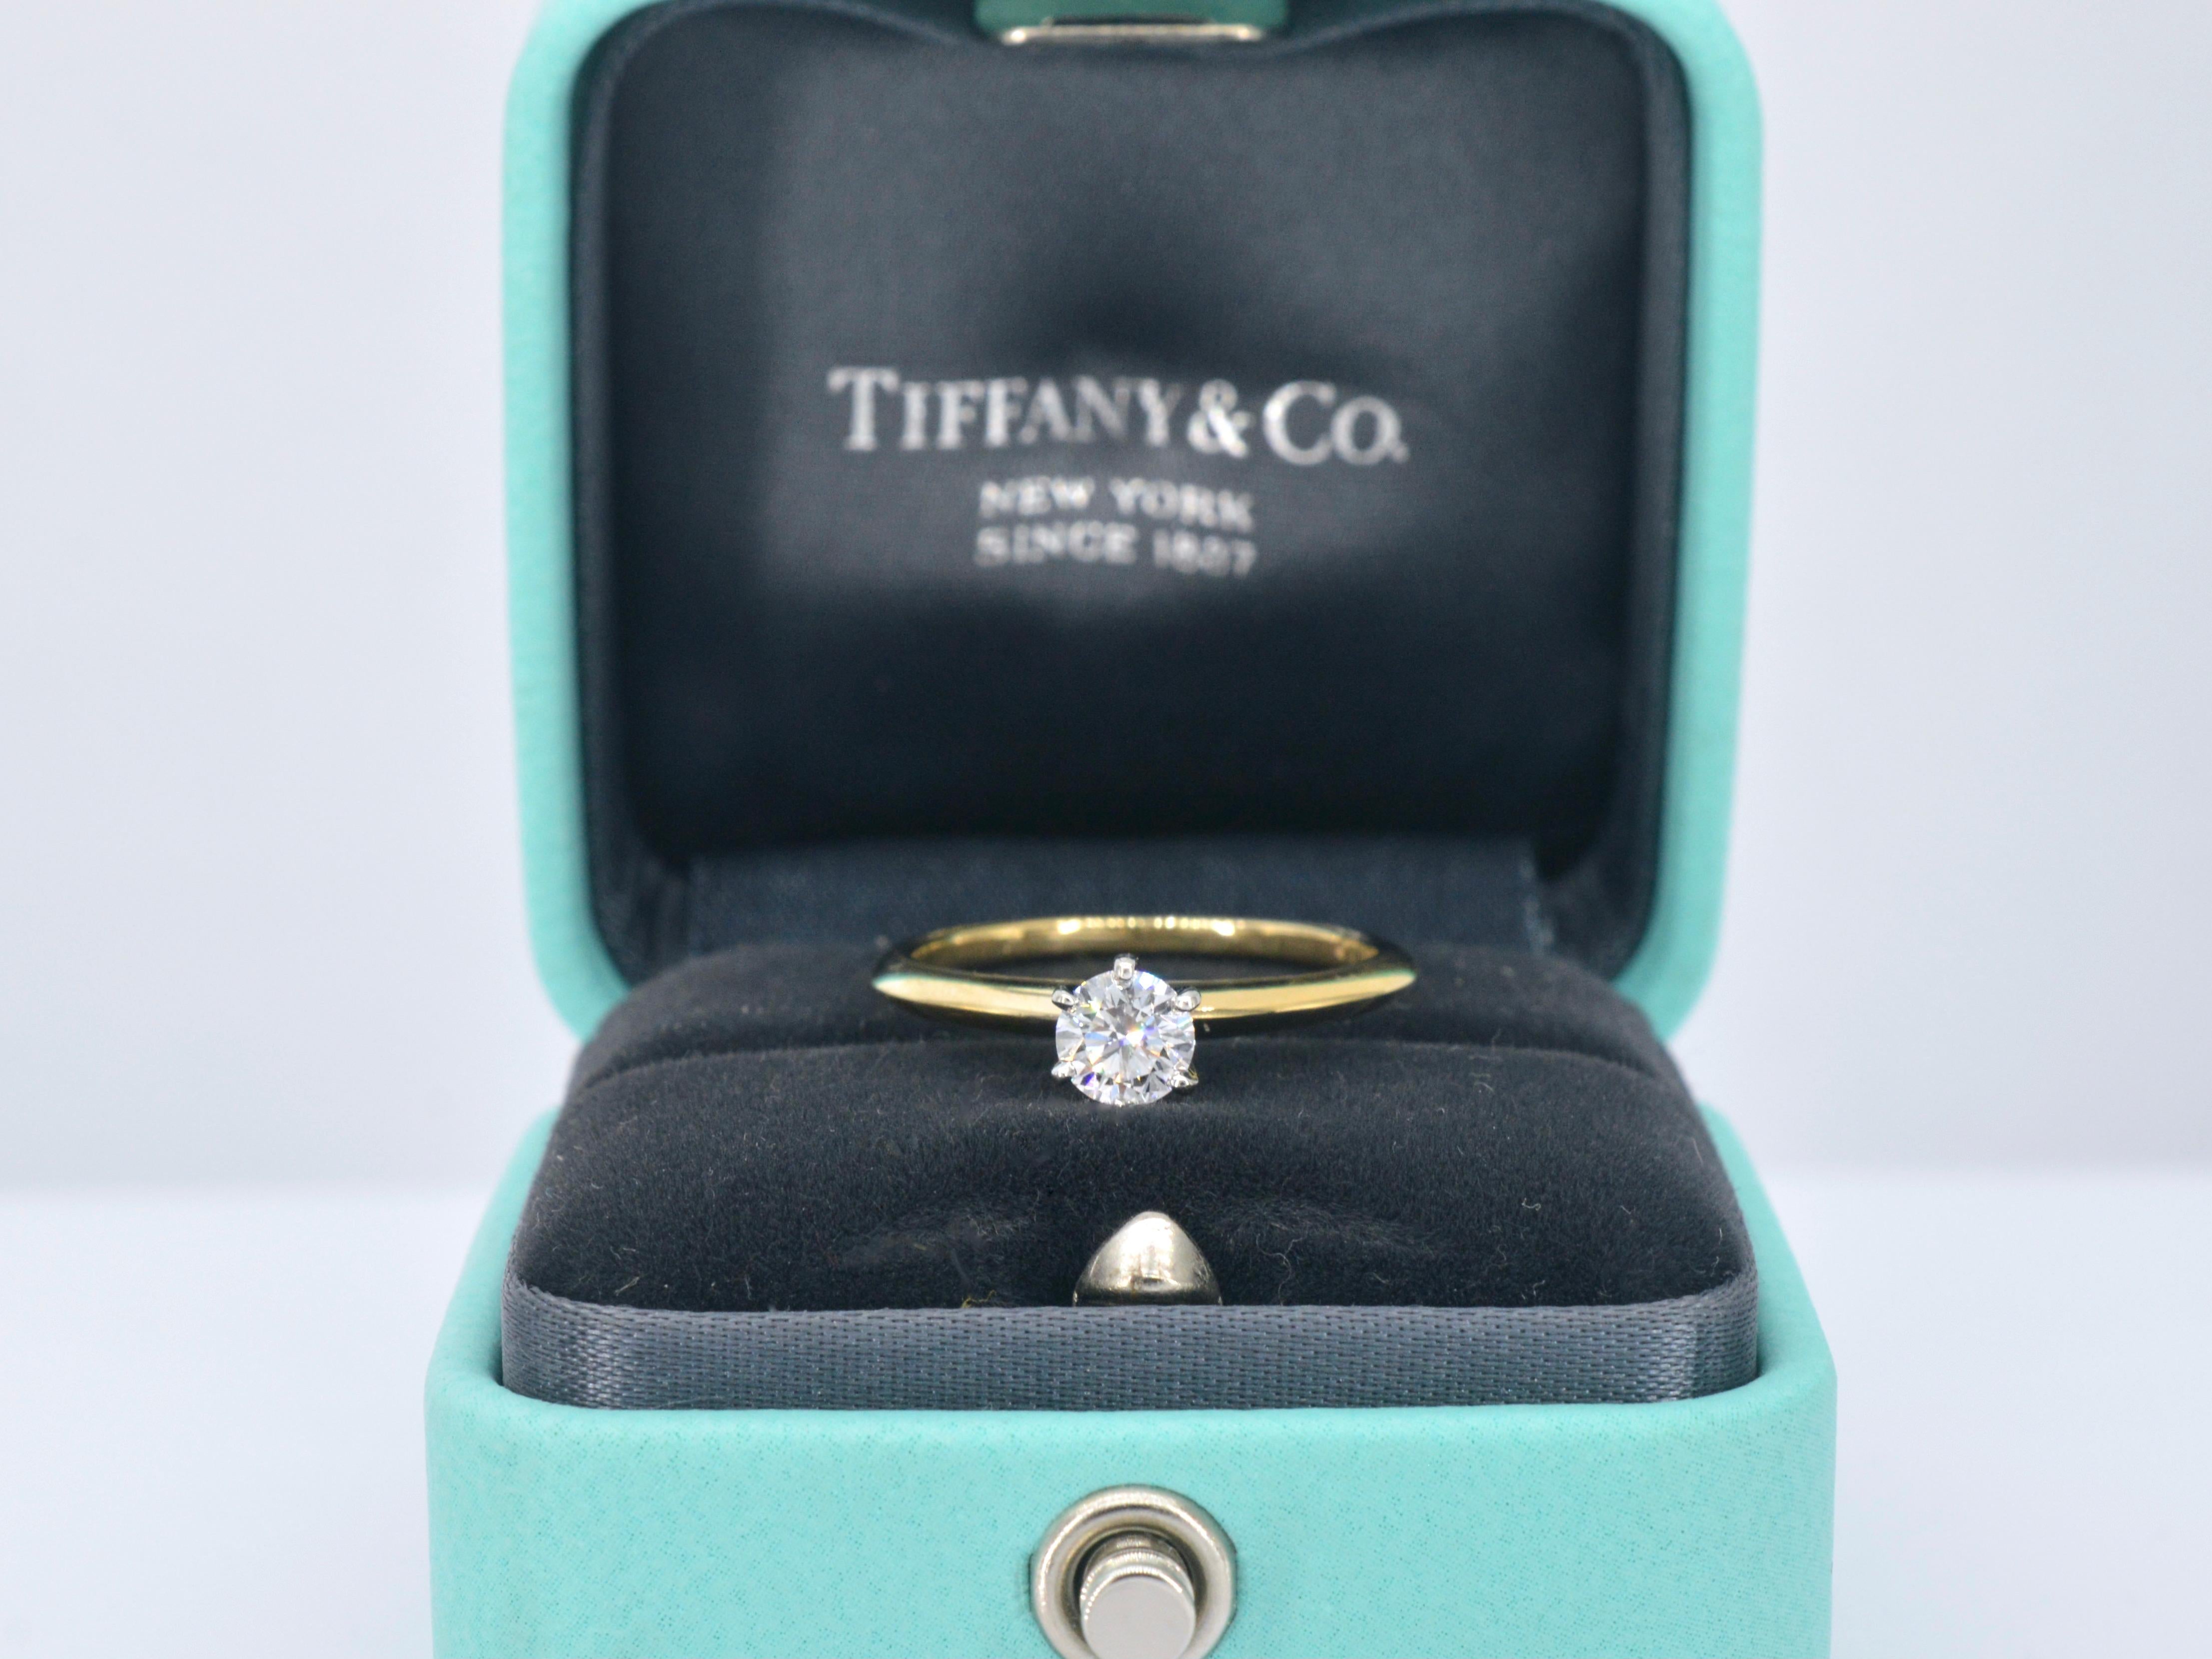 Platinum Tiffany & Co Ring with a Diamond 2